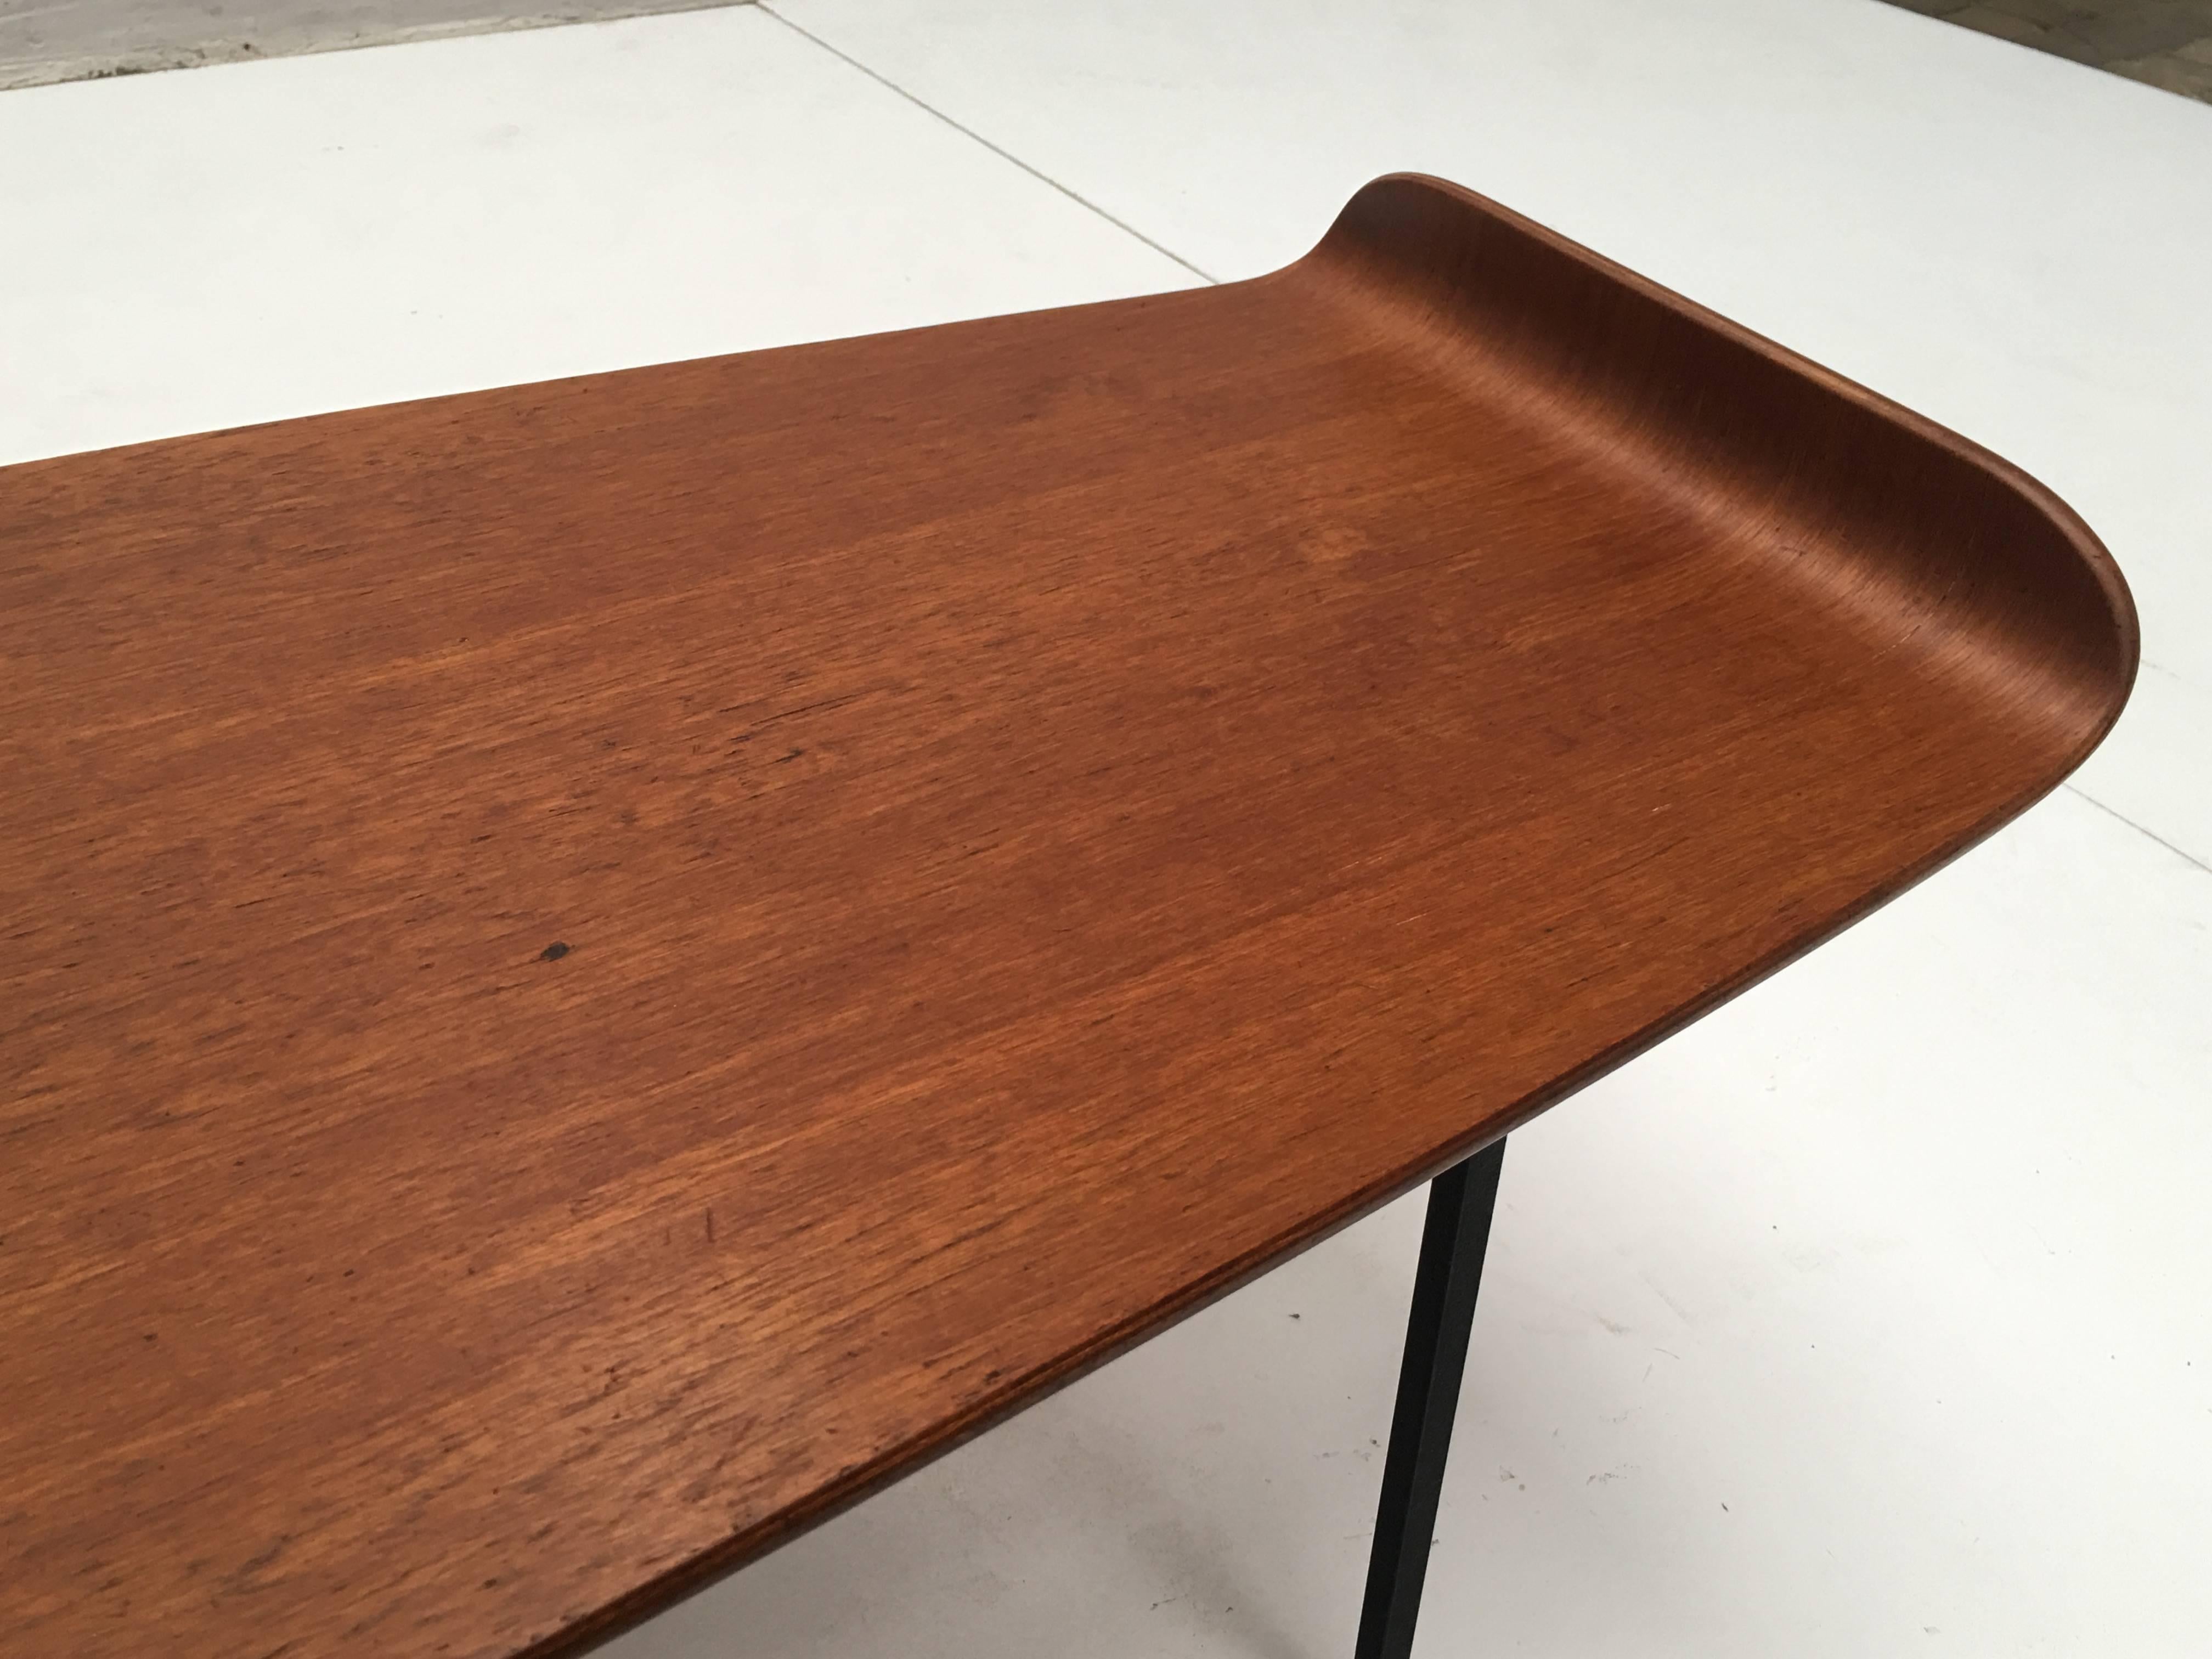 Plywood 'Pilade' Coffee Table by Campo & Graffi, 1958 with label & impressed artists mark